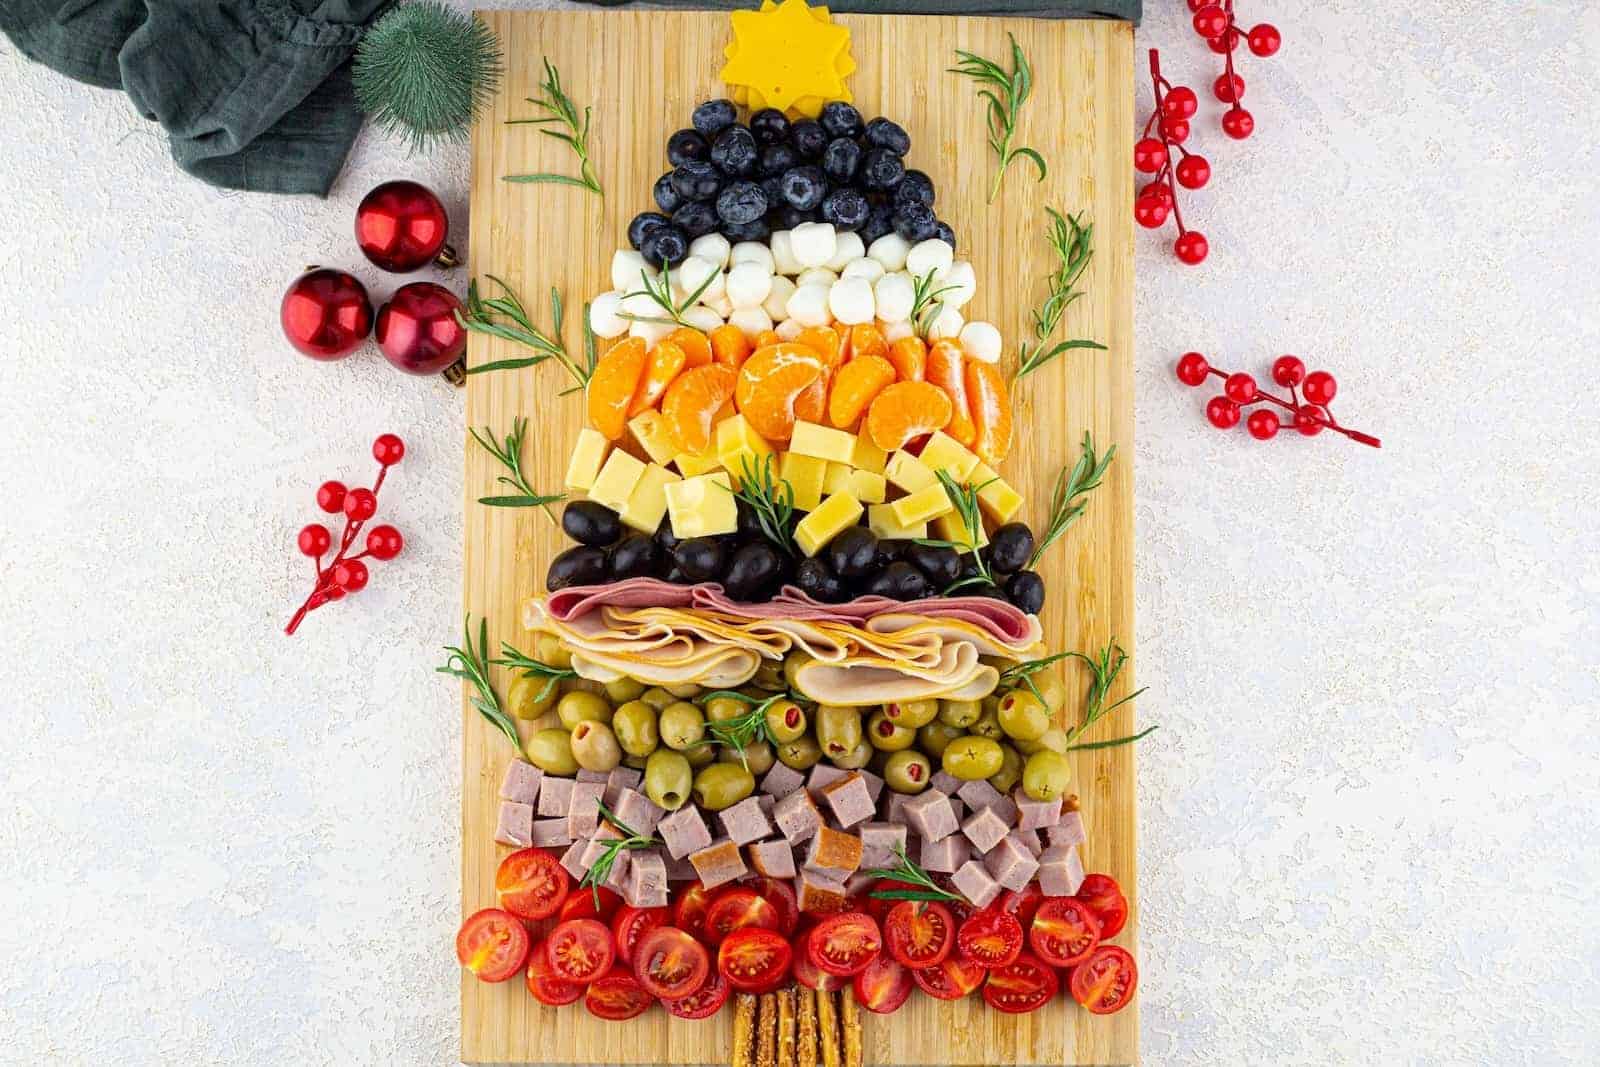 A Christmas tree charcuterie board made of cured meat, cheese, olives, and fruit.